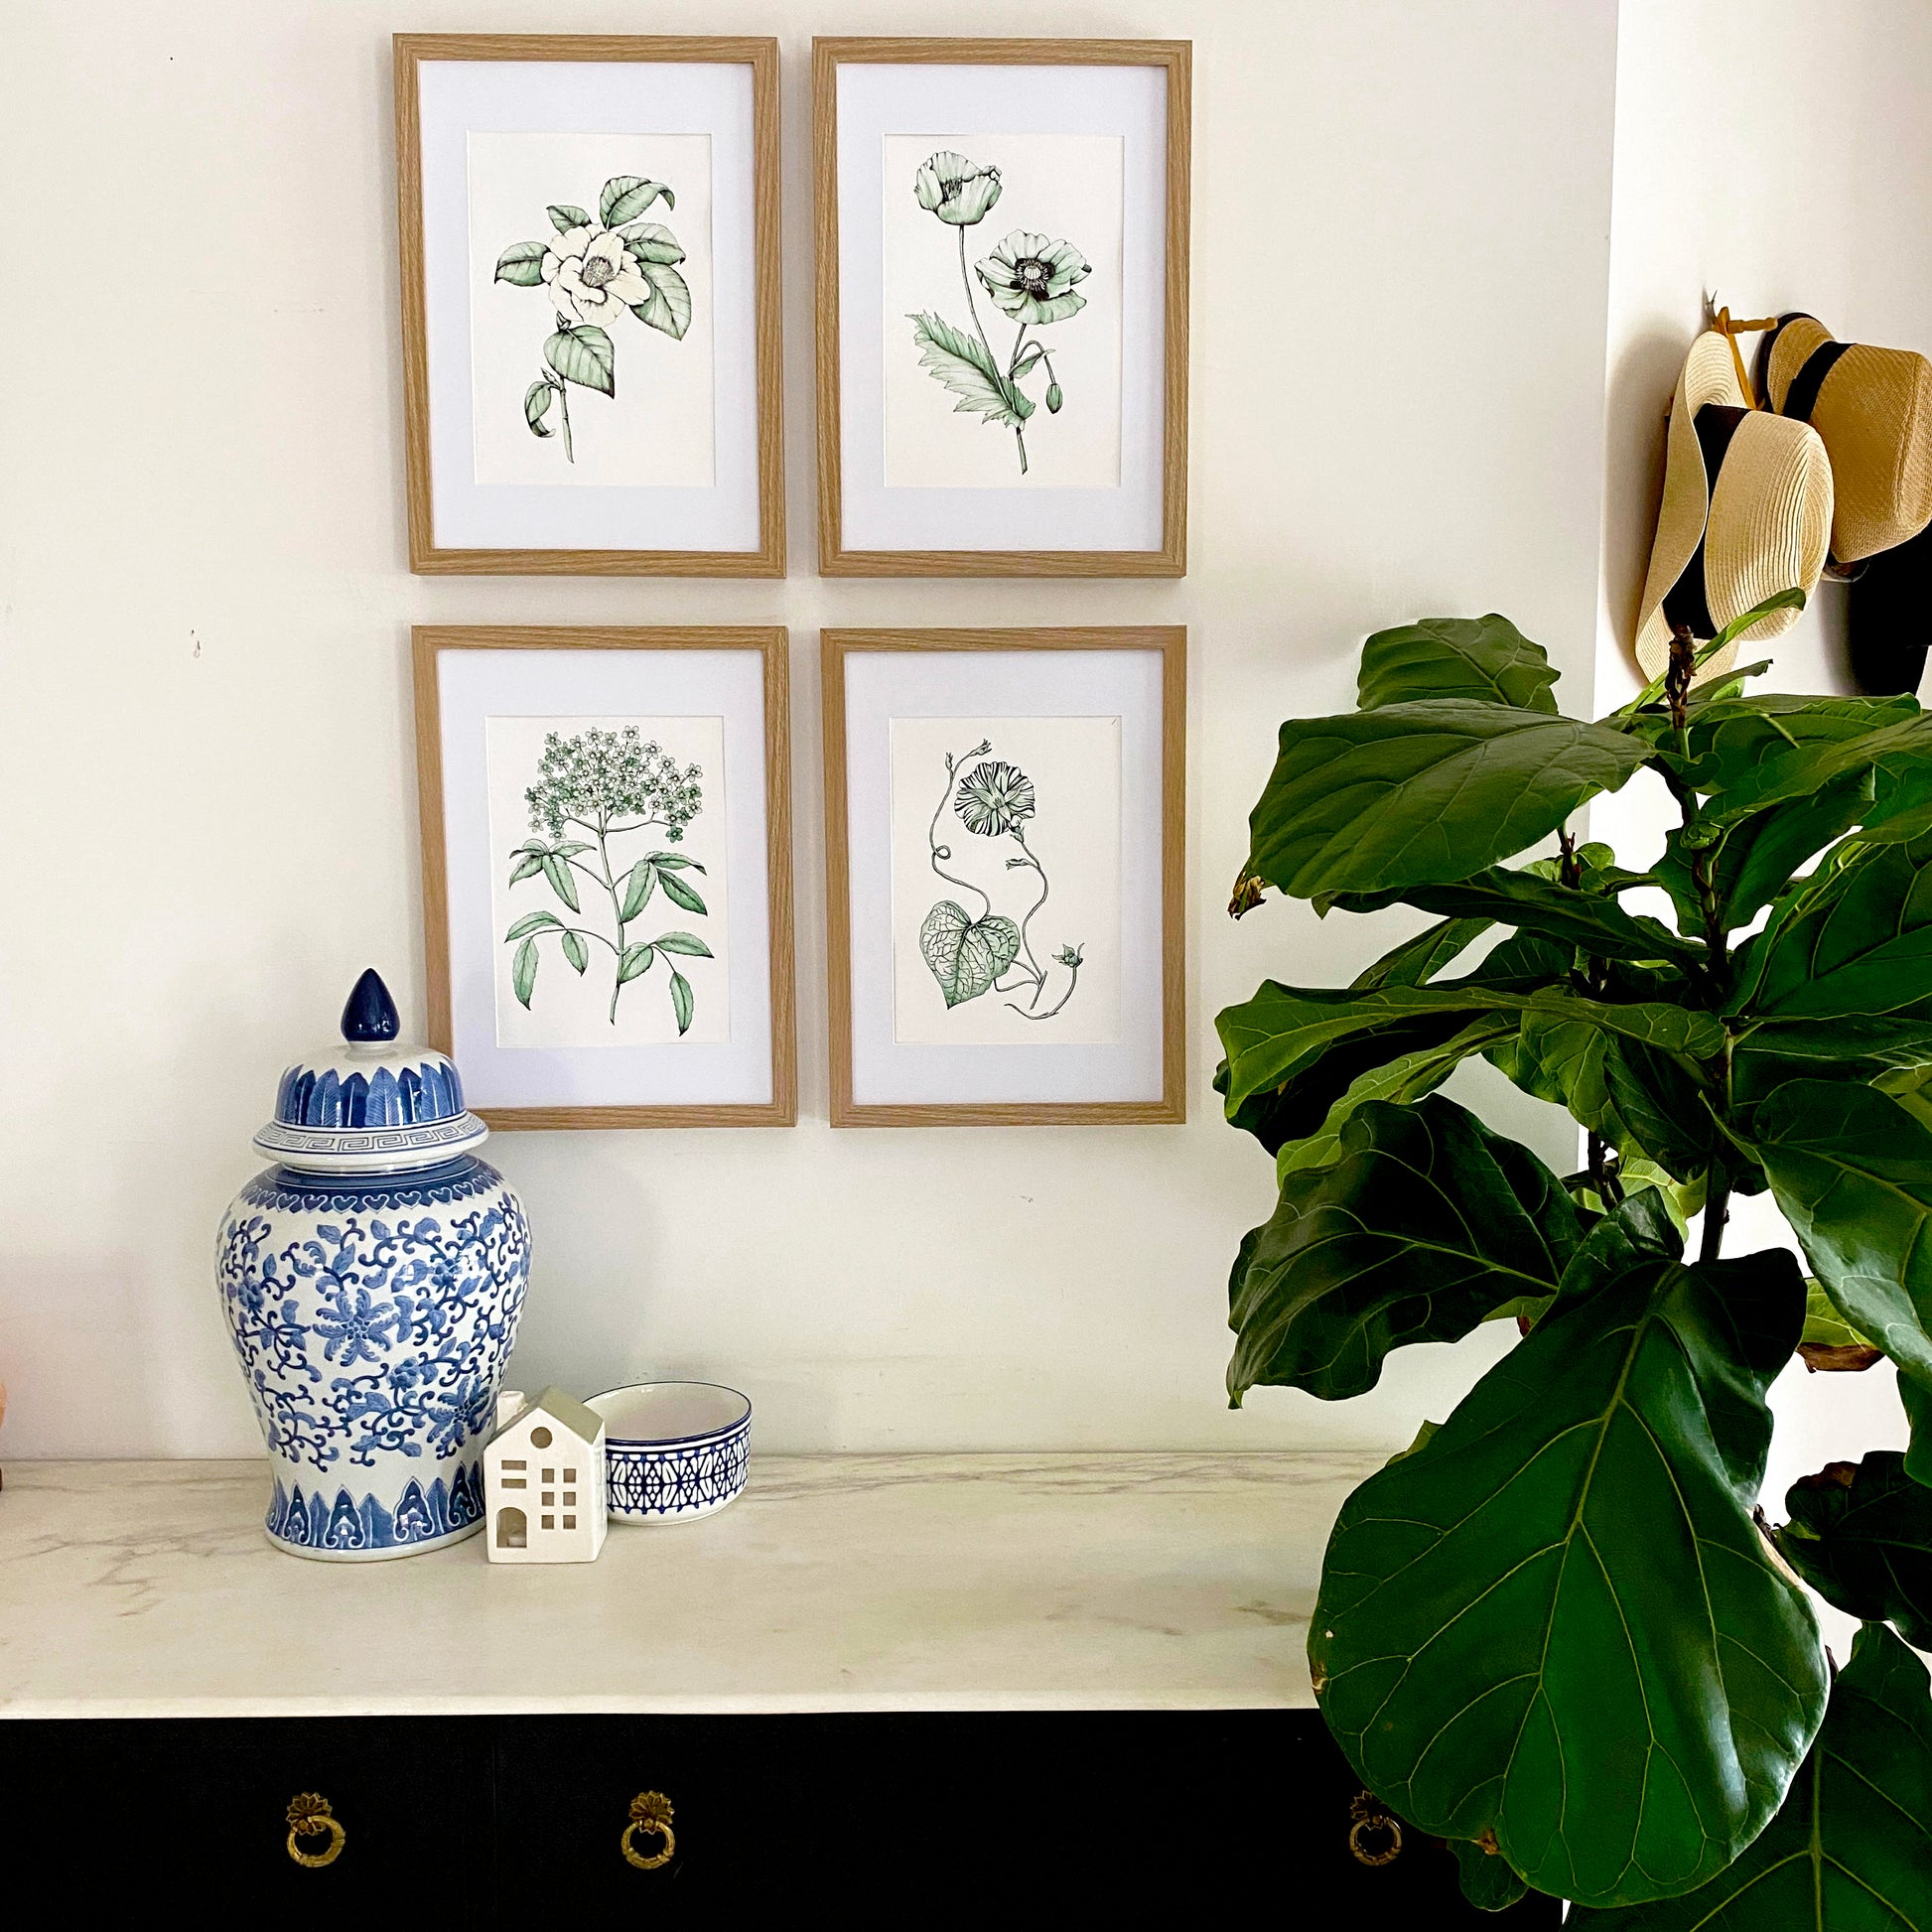 Vintage style botanical set of 4 prints. Art prints are created using watercolours in sage green and shadows highlighted in line art